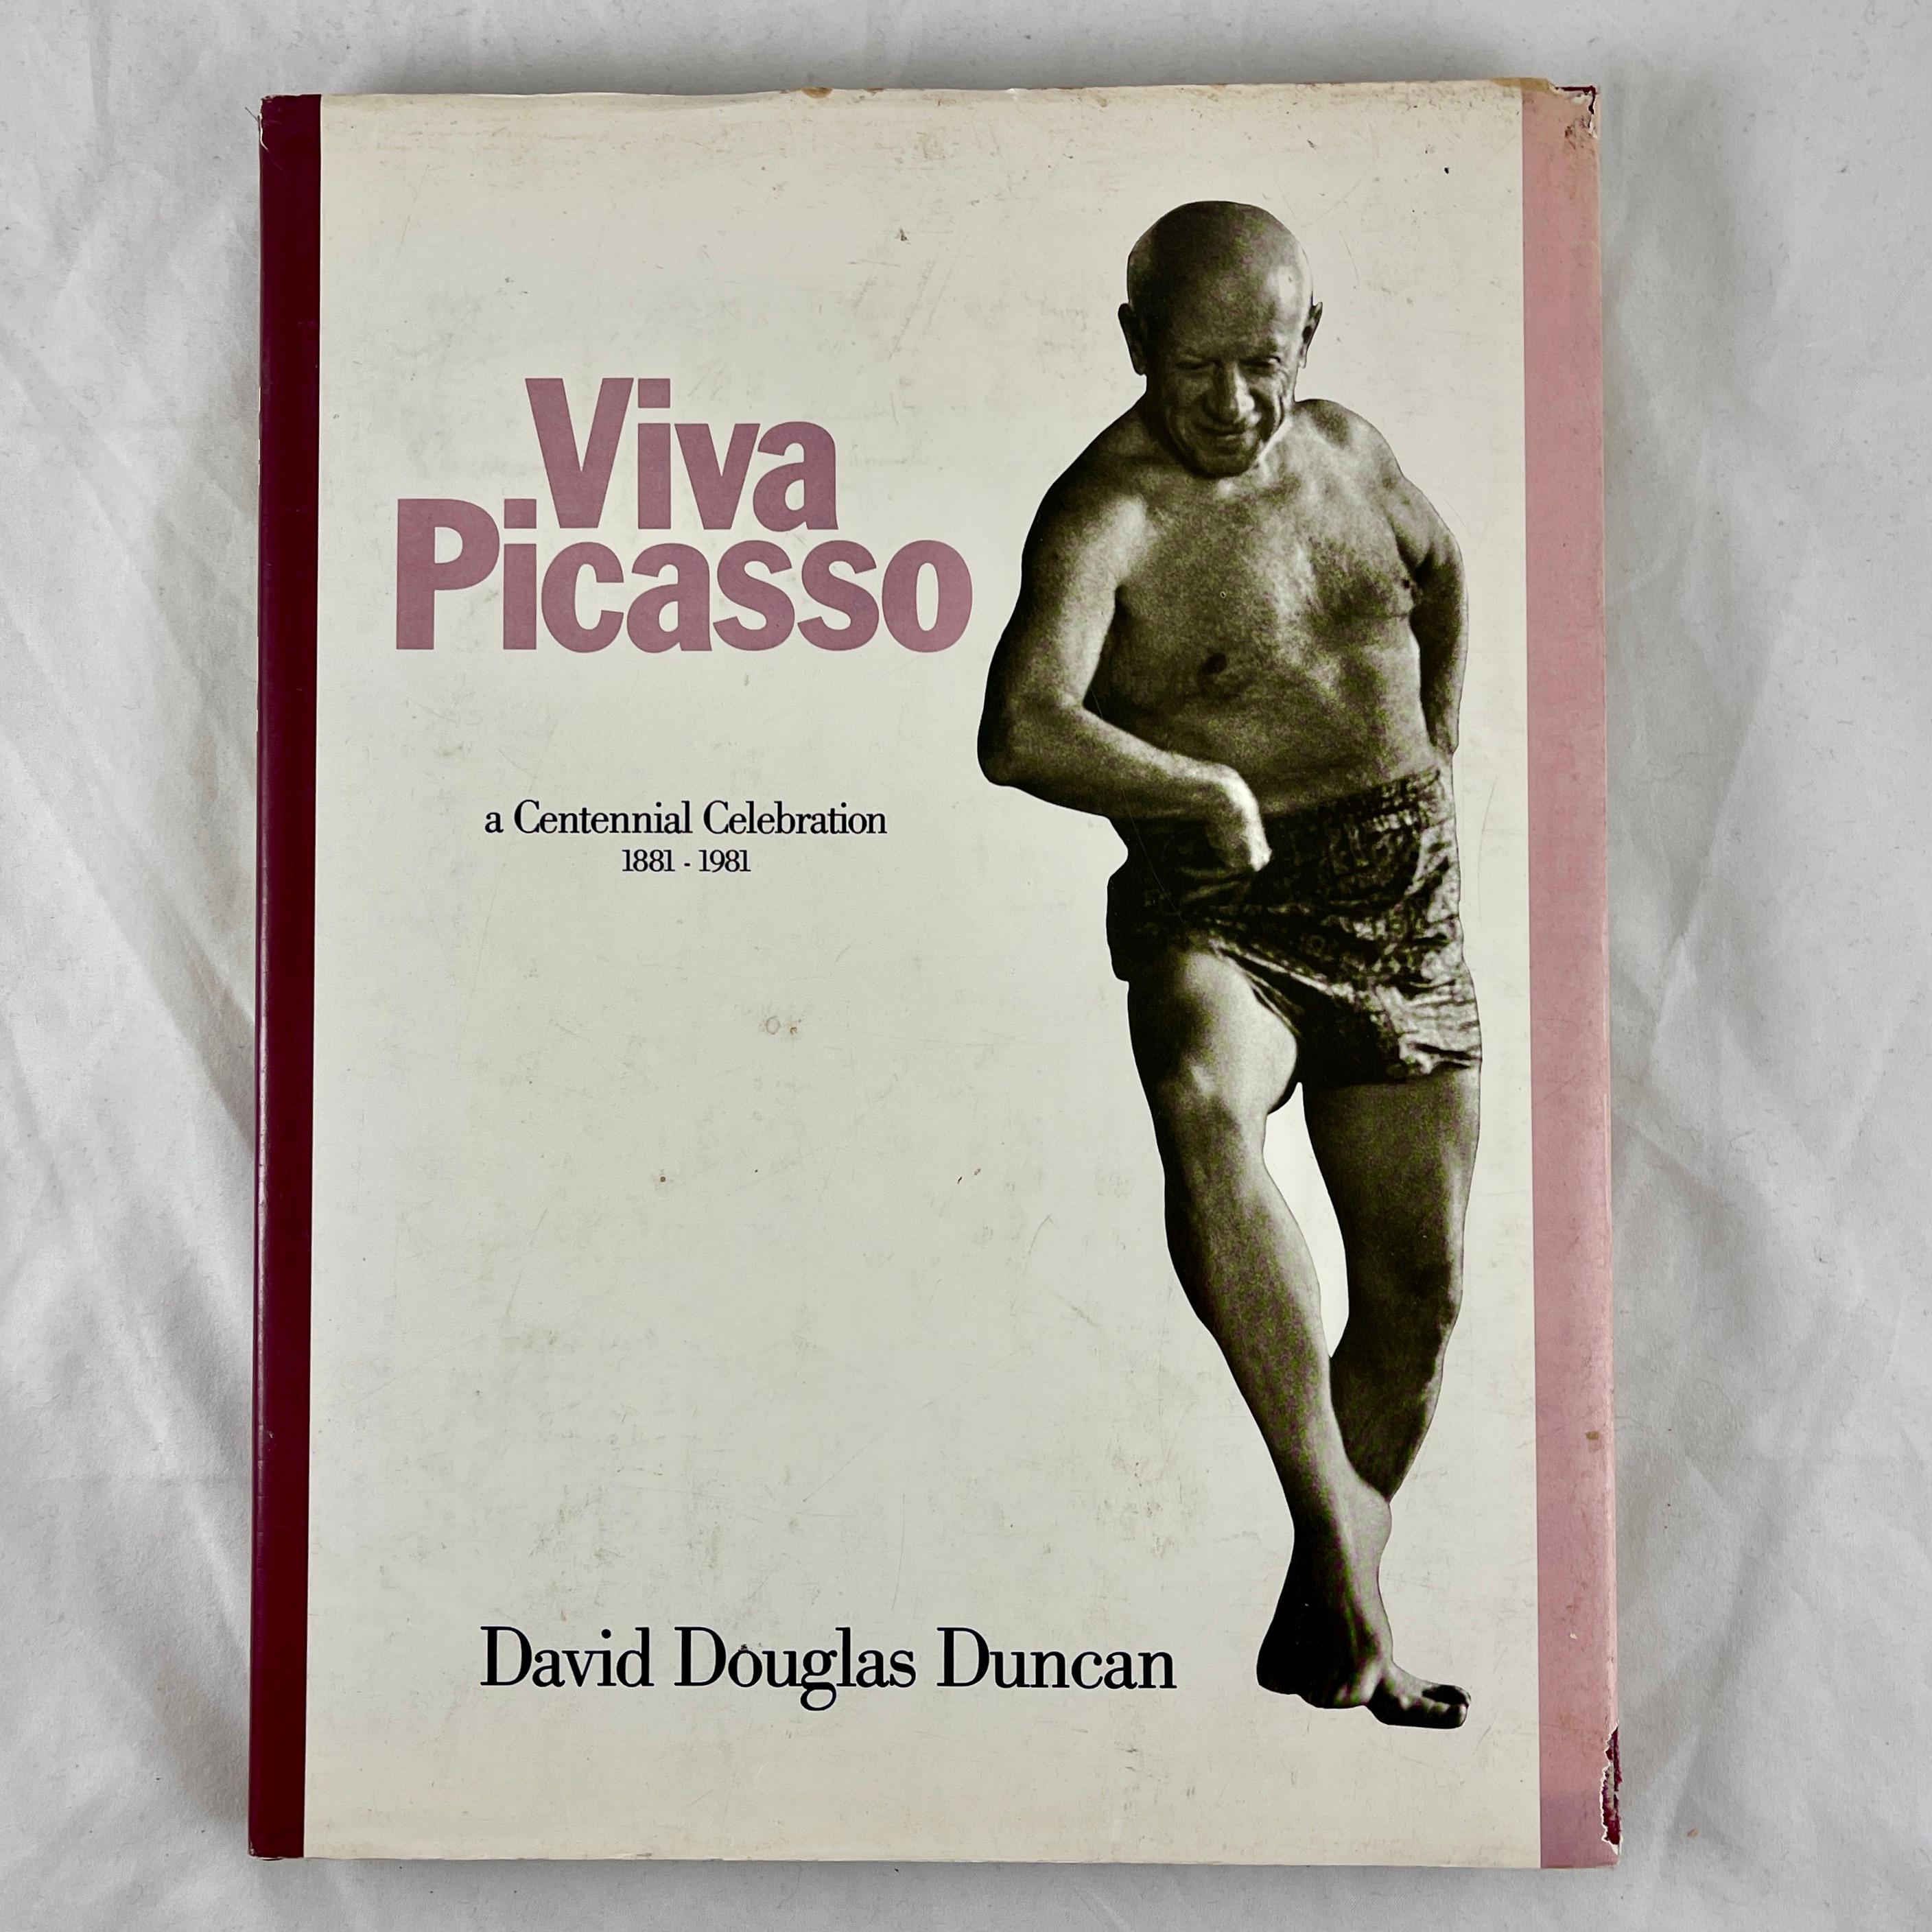 Viva Picasso: a Centennial Celebration 1881-1981 Hardcover Book with Jacket For Sale 2